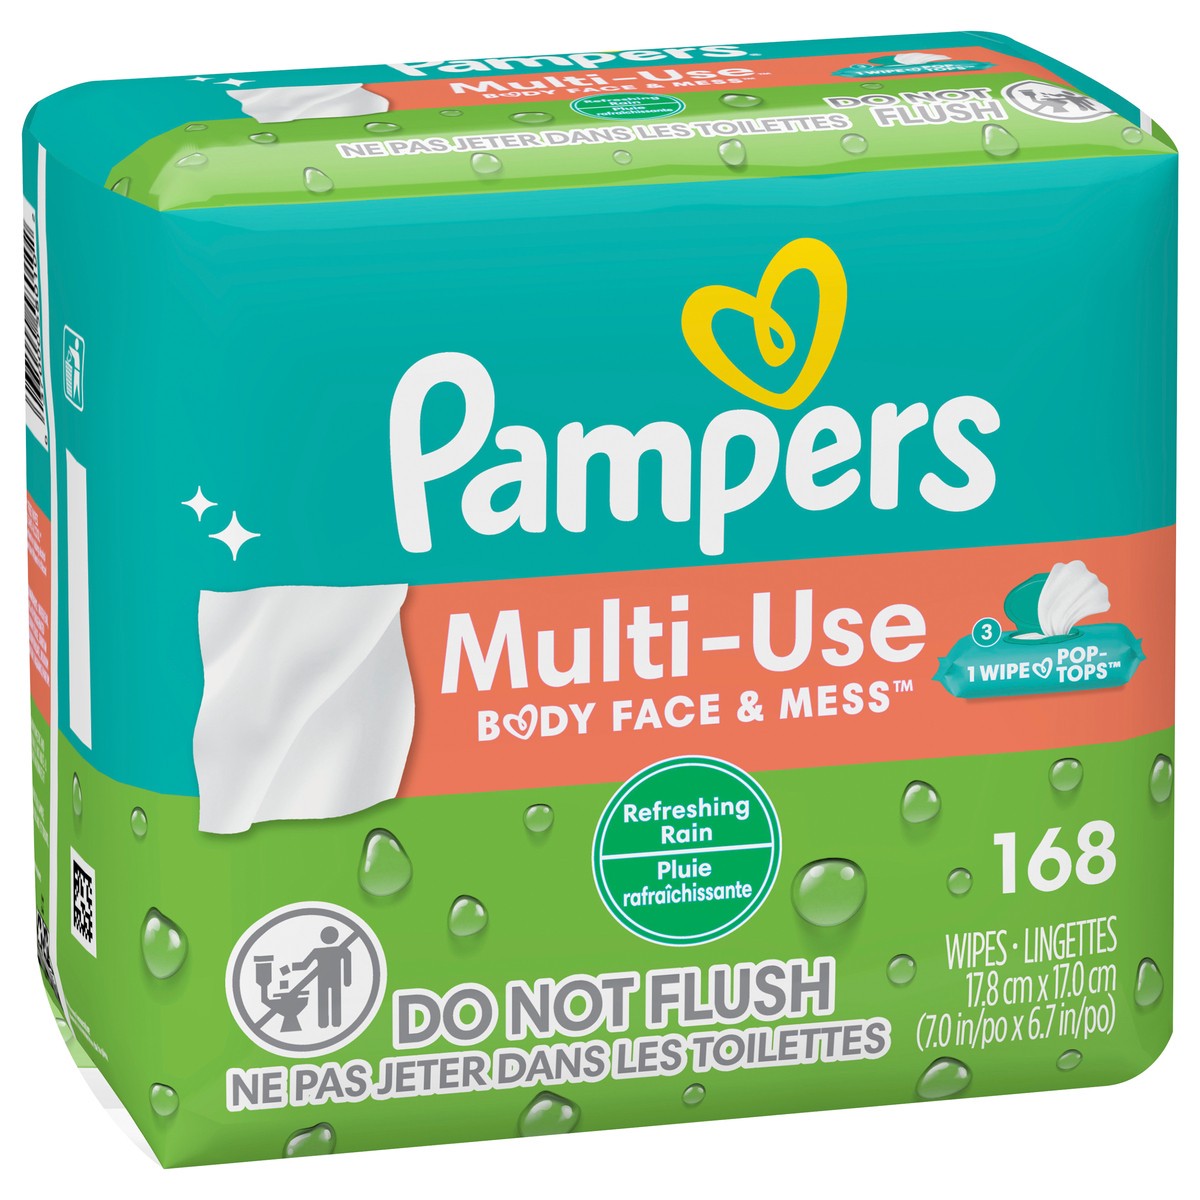 slide 2 of 4, Pampers Expressions Botanical Rain Baby Wipes 3x, 168 ct